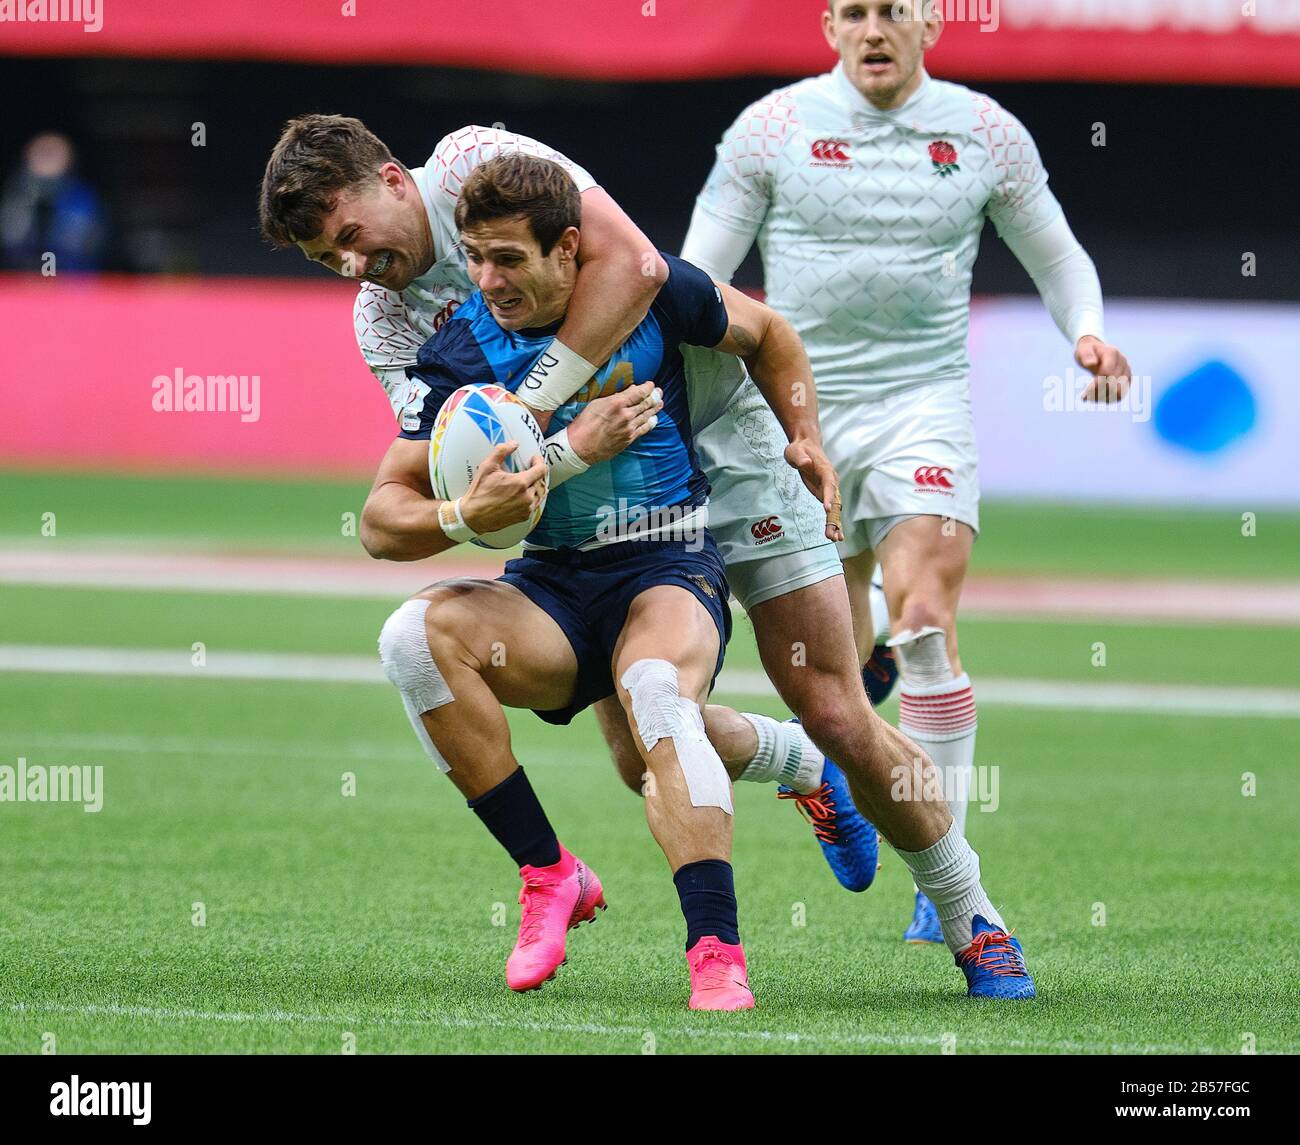 Vancouver, Canada. 7th Mar, 2020. Rodrigo Etchart #5 of Argentina tackled by England players in Match #3 during Day 1 - 2020 HSBC World Rugby Sevens Series at BC Place in Vancouver, Canada. Credit: Joe Ng/Alamy Live News Stock Photo